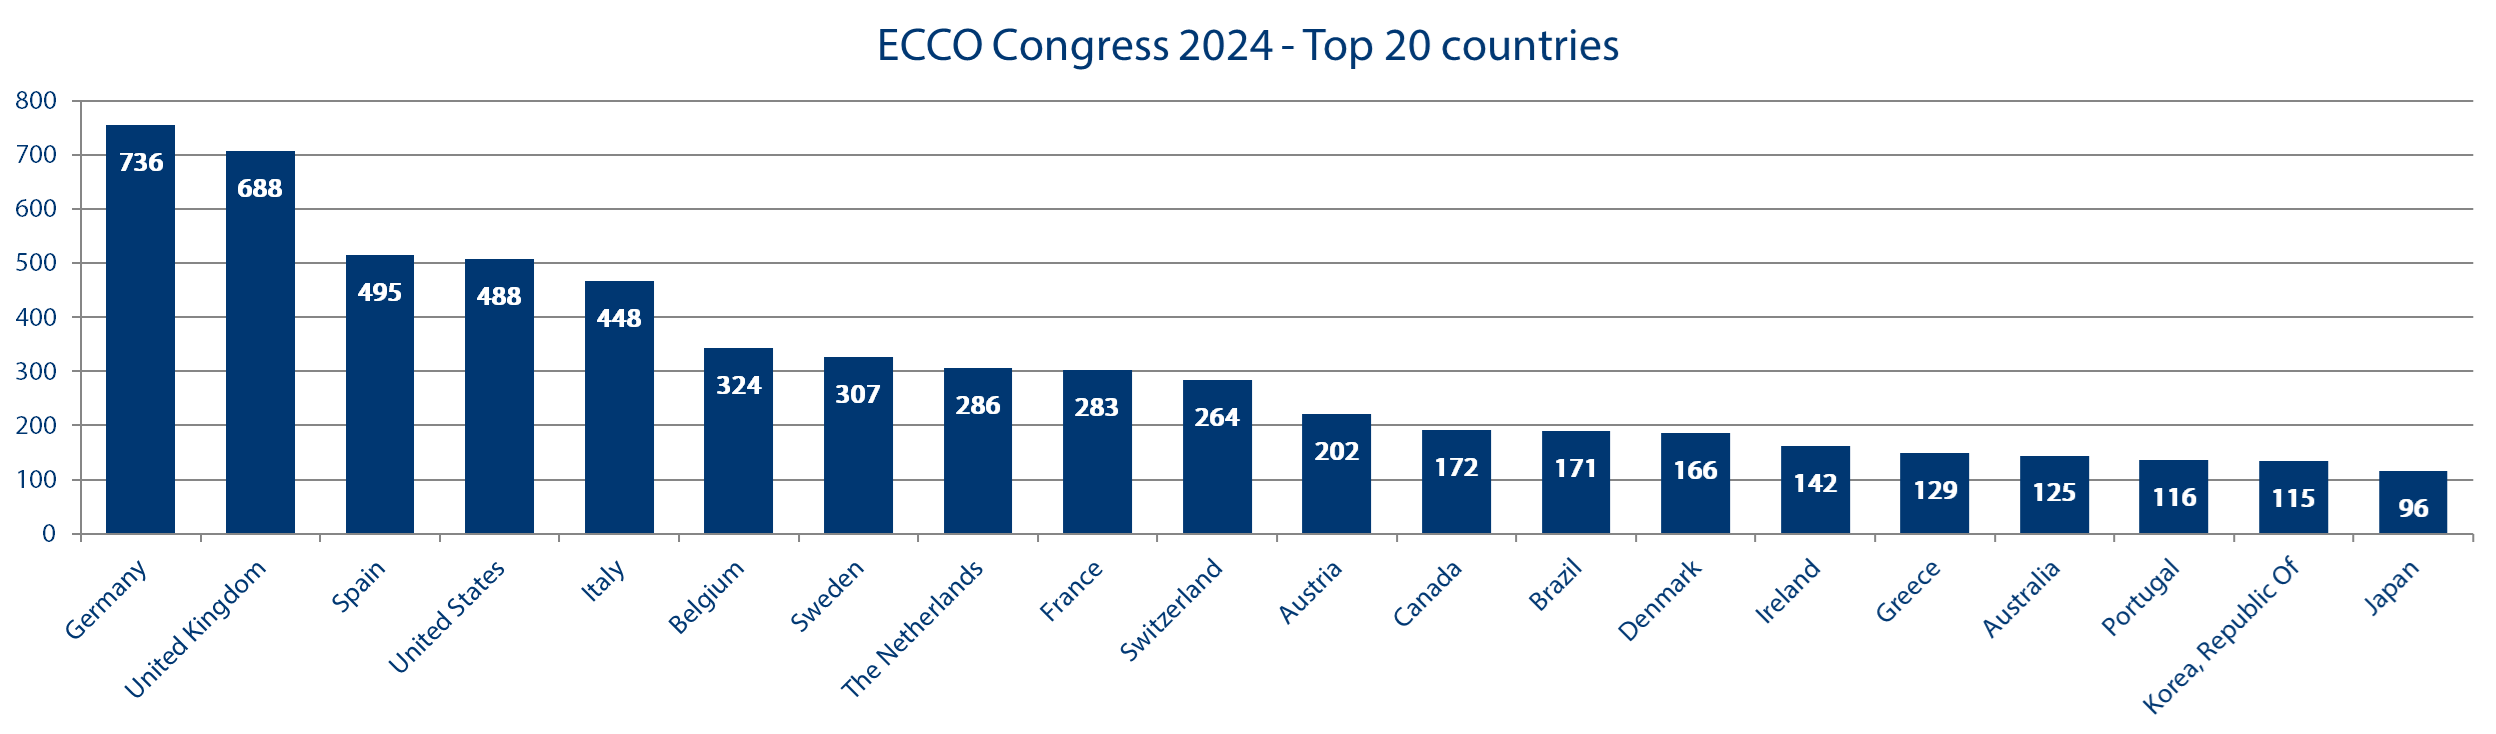 Top 20 Countries at ECCO’24 Stockholm